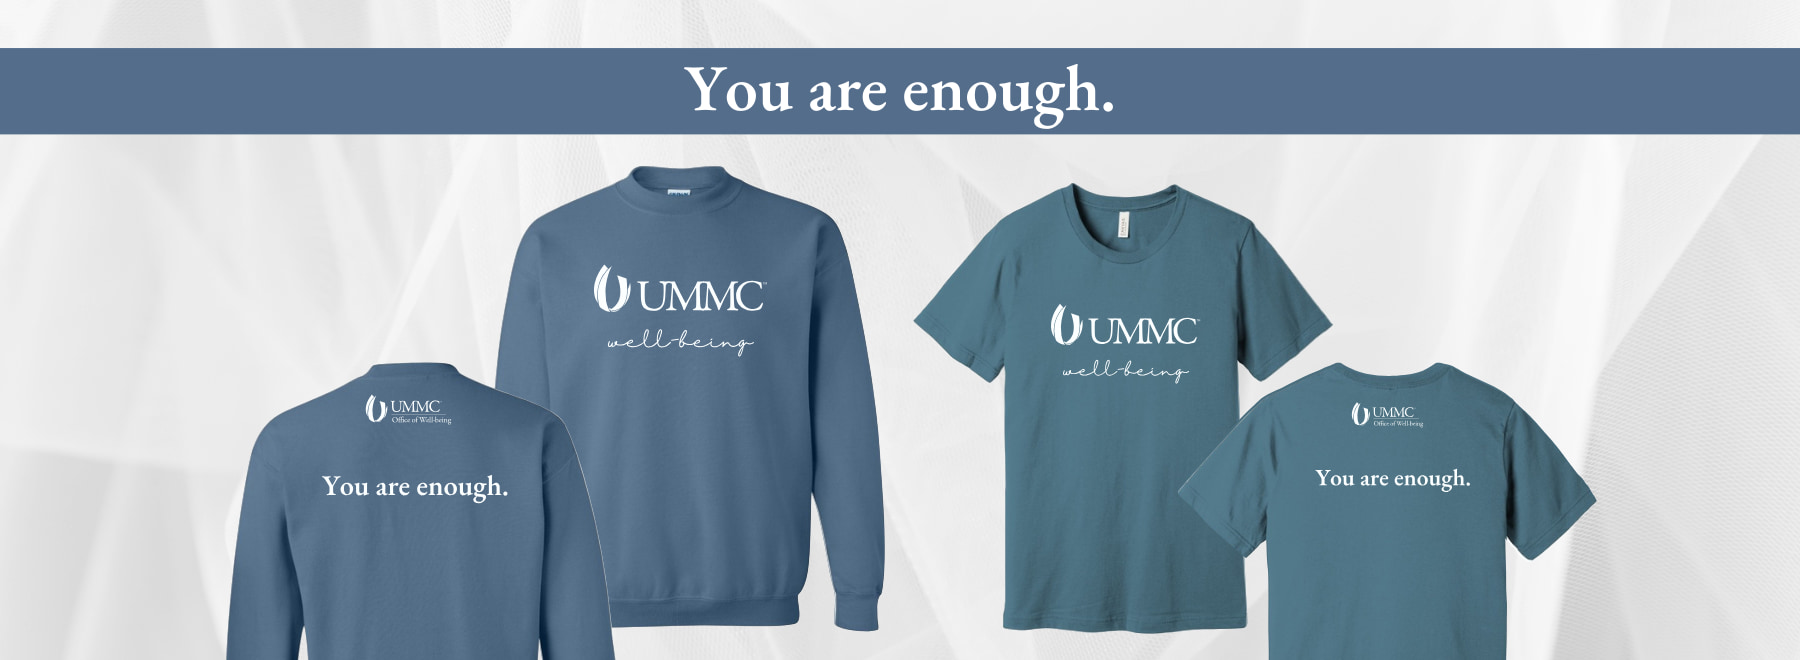 Collection of blue ummc wellness apparel with motivational slogan 